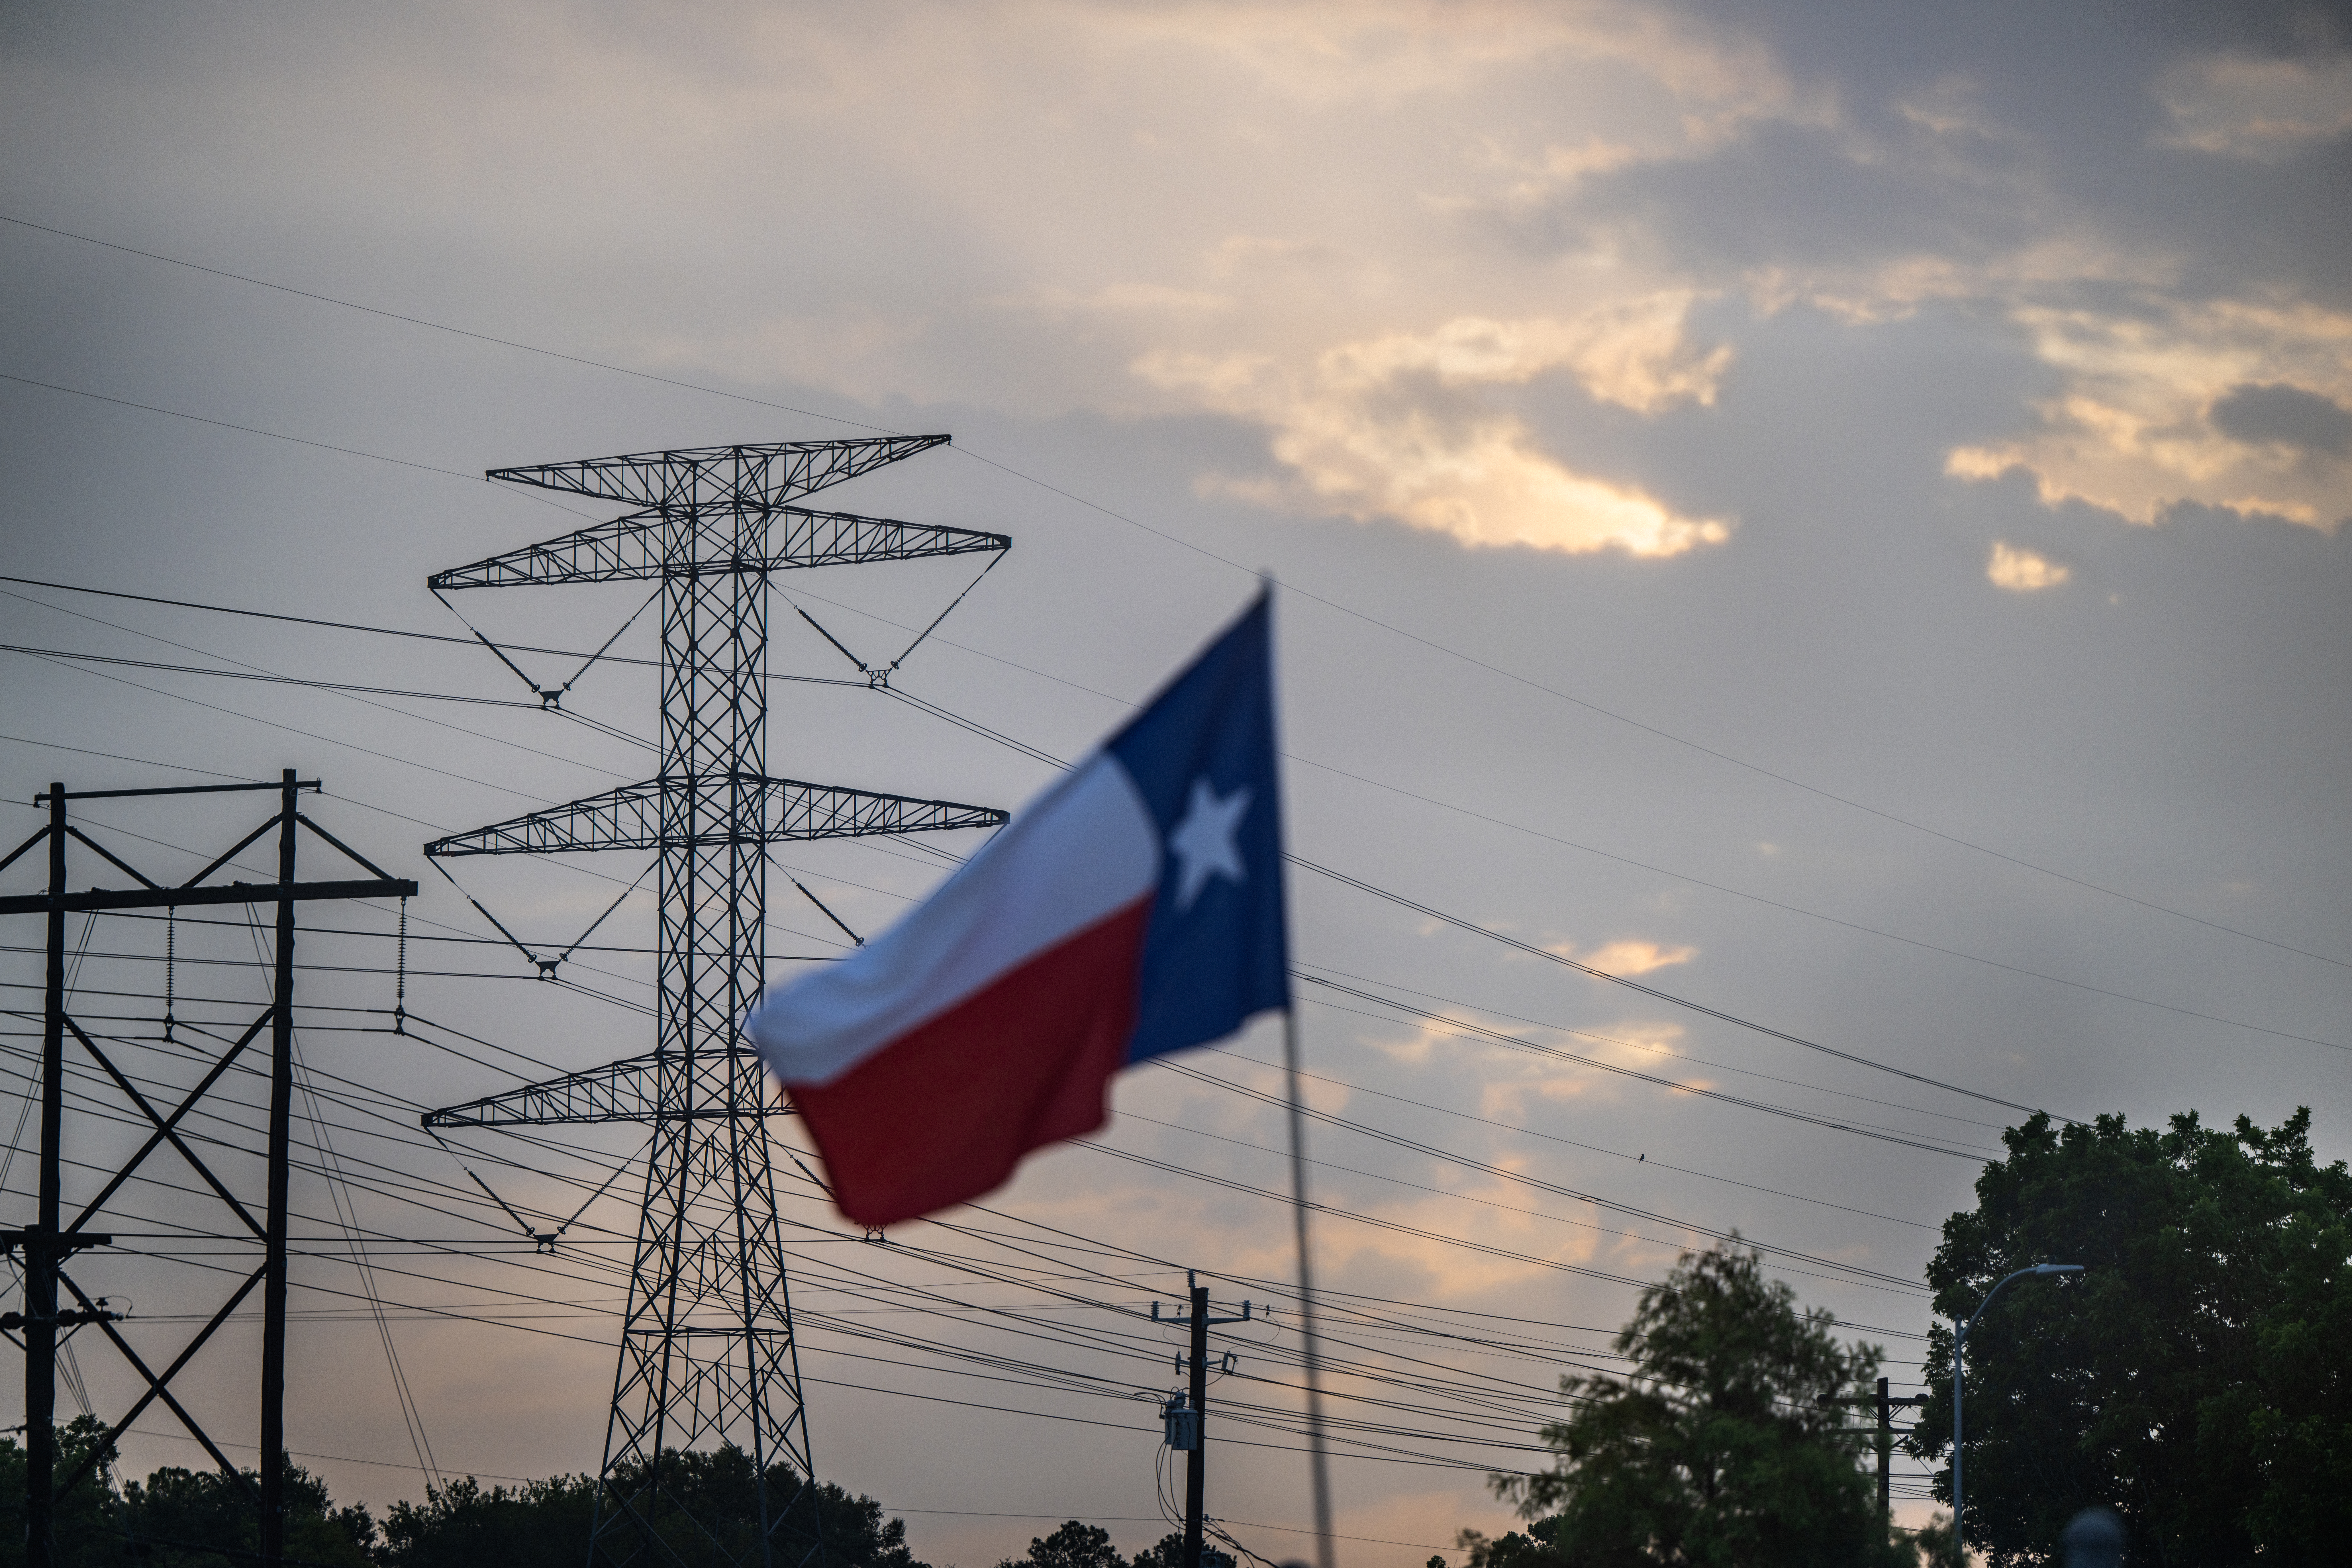 HOUSTON, TEXAS - JULY 11: A transmission tower is seen on July 11, 2022 in Houston, Texas. ERCOT (Electric Reliability Council of Texas) is urging Texans to voluntarily conserve power today, due to extreme heat potentially causing rolling blackouts. ERCOT has also projected there to be no blackouts this week. (Photo by Brandon Bell/Getty Images)